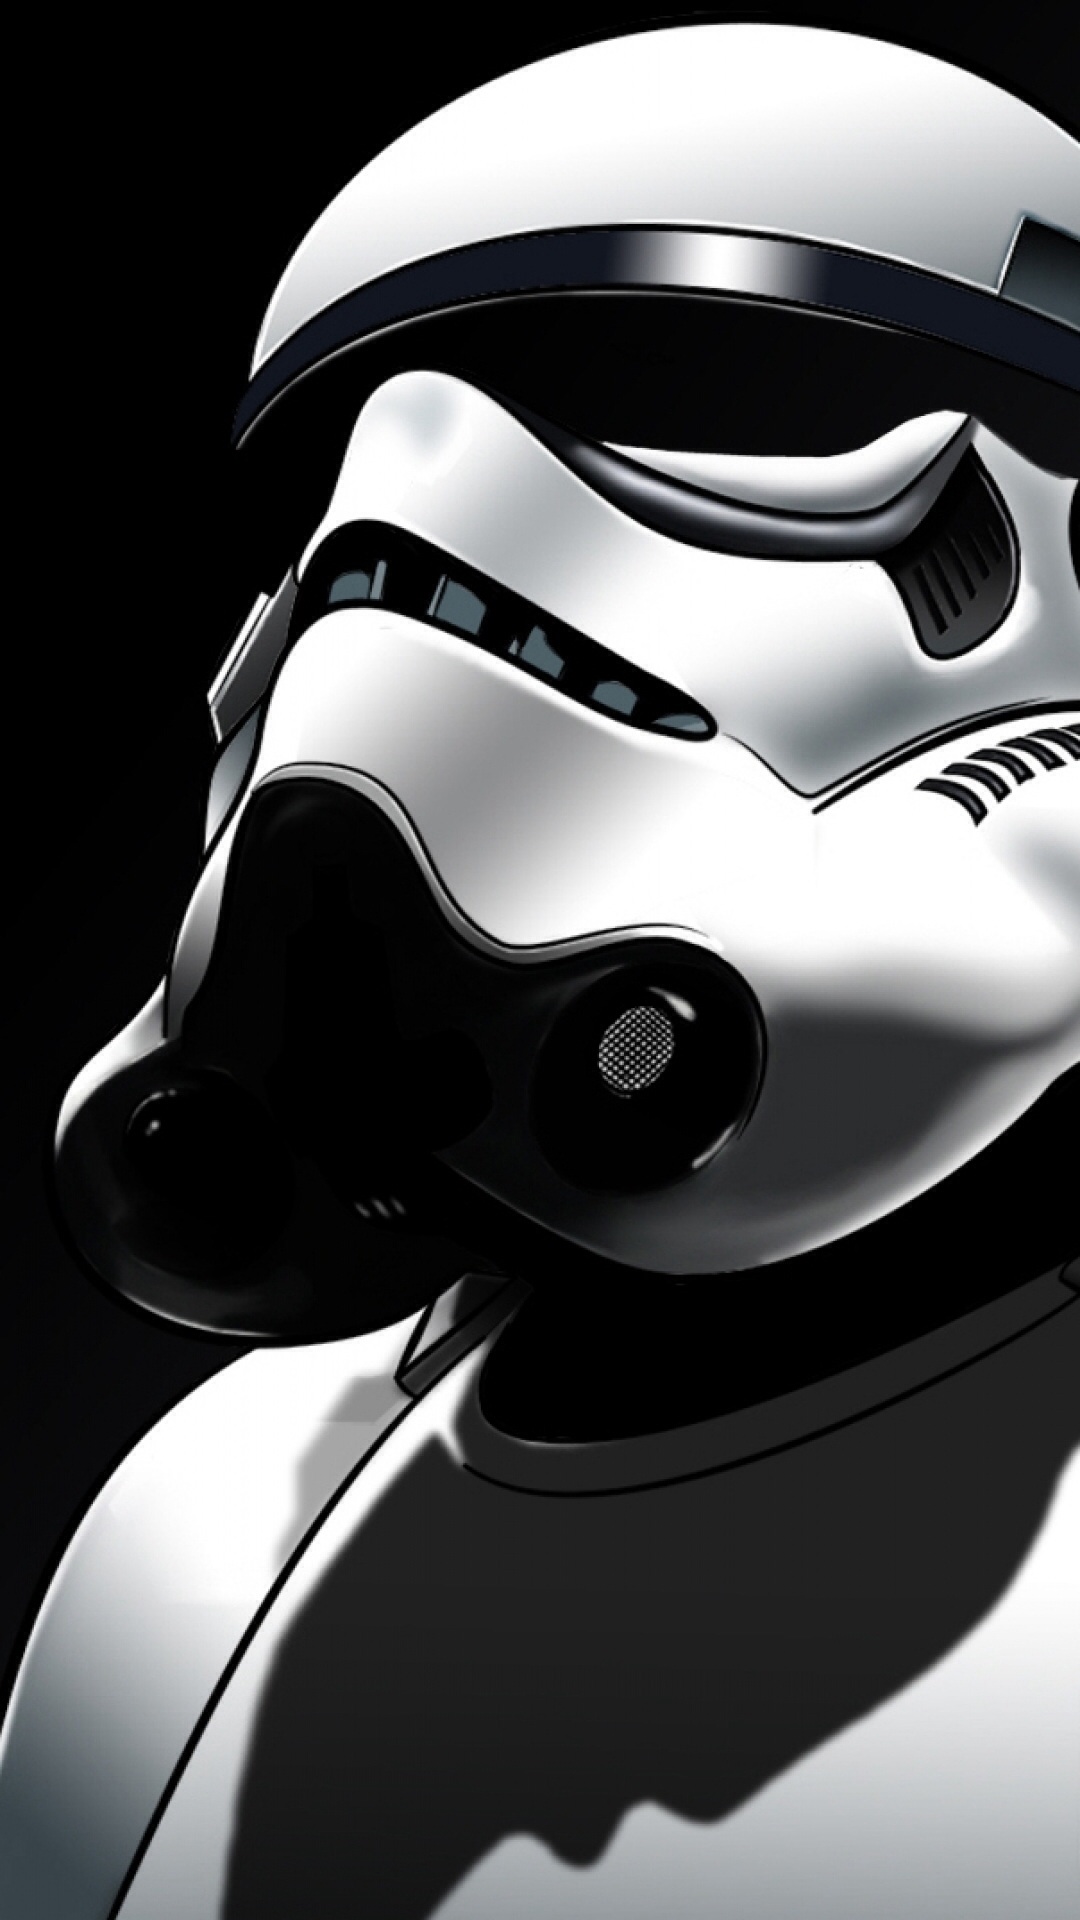 Best Phone Wallpapers Collection Stormtrooper Hd Wallpaper Backgrounds Download